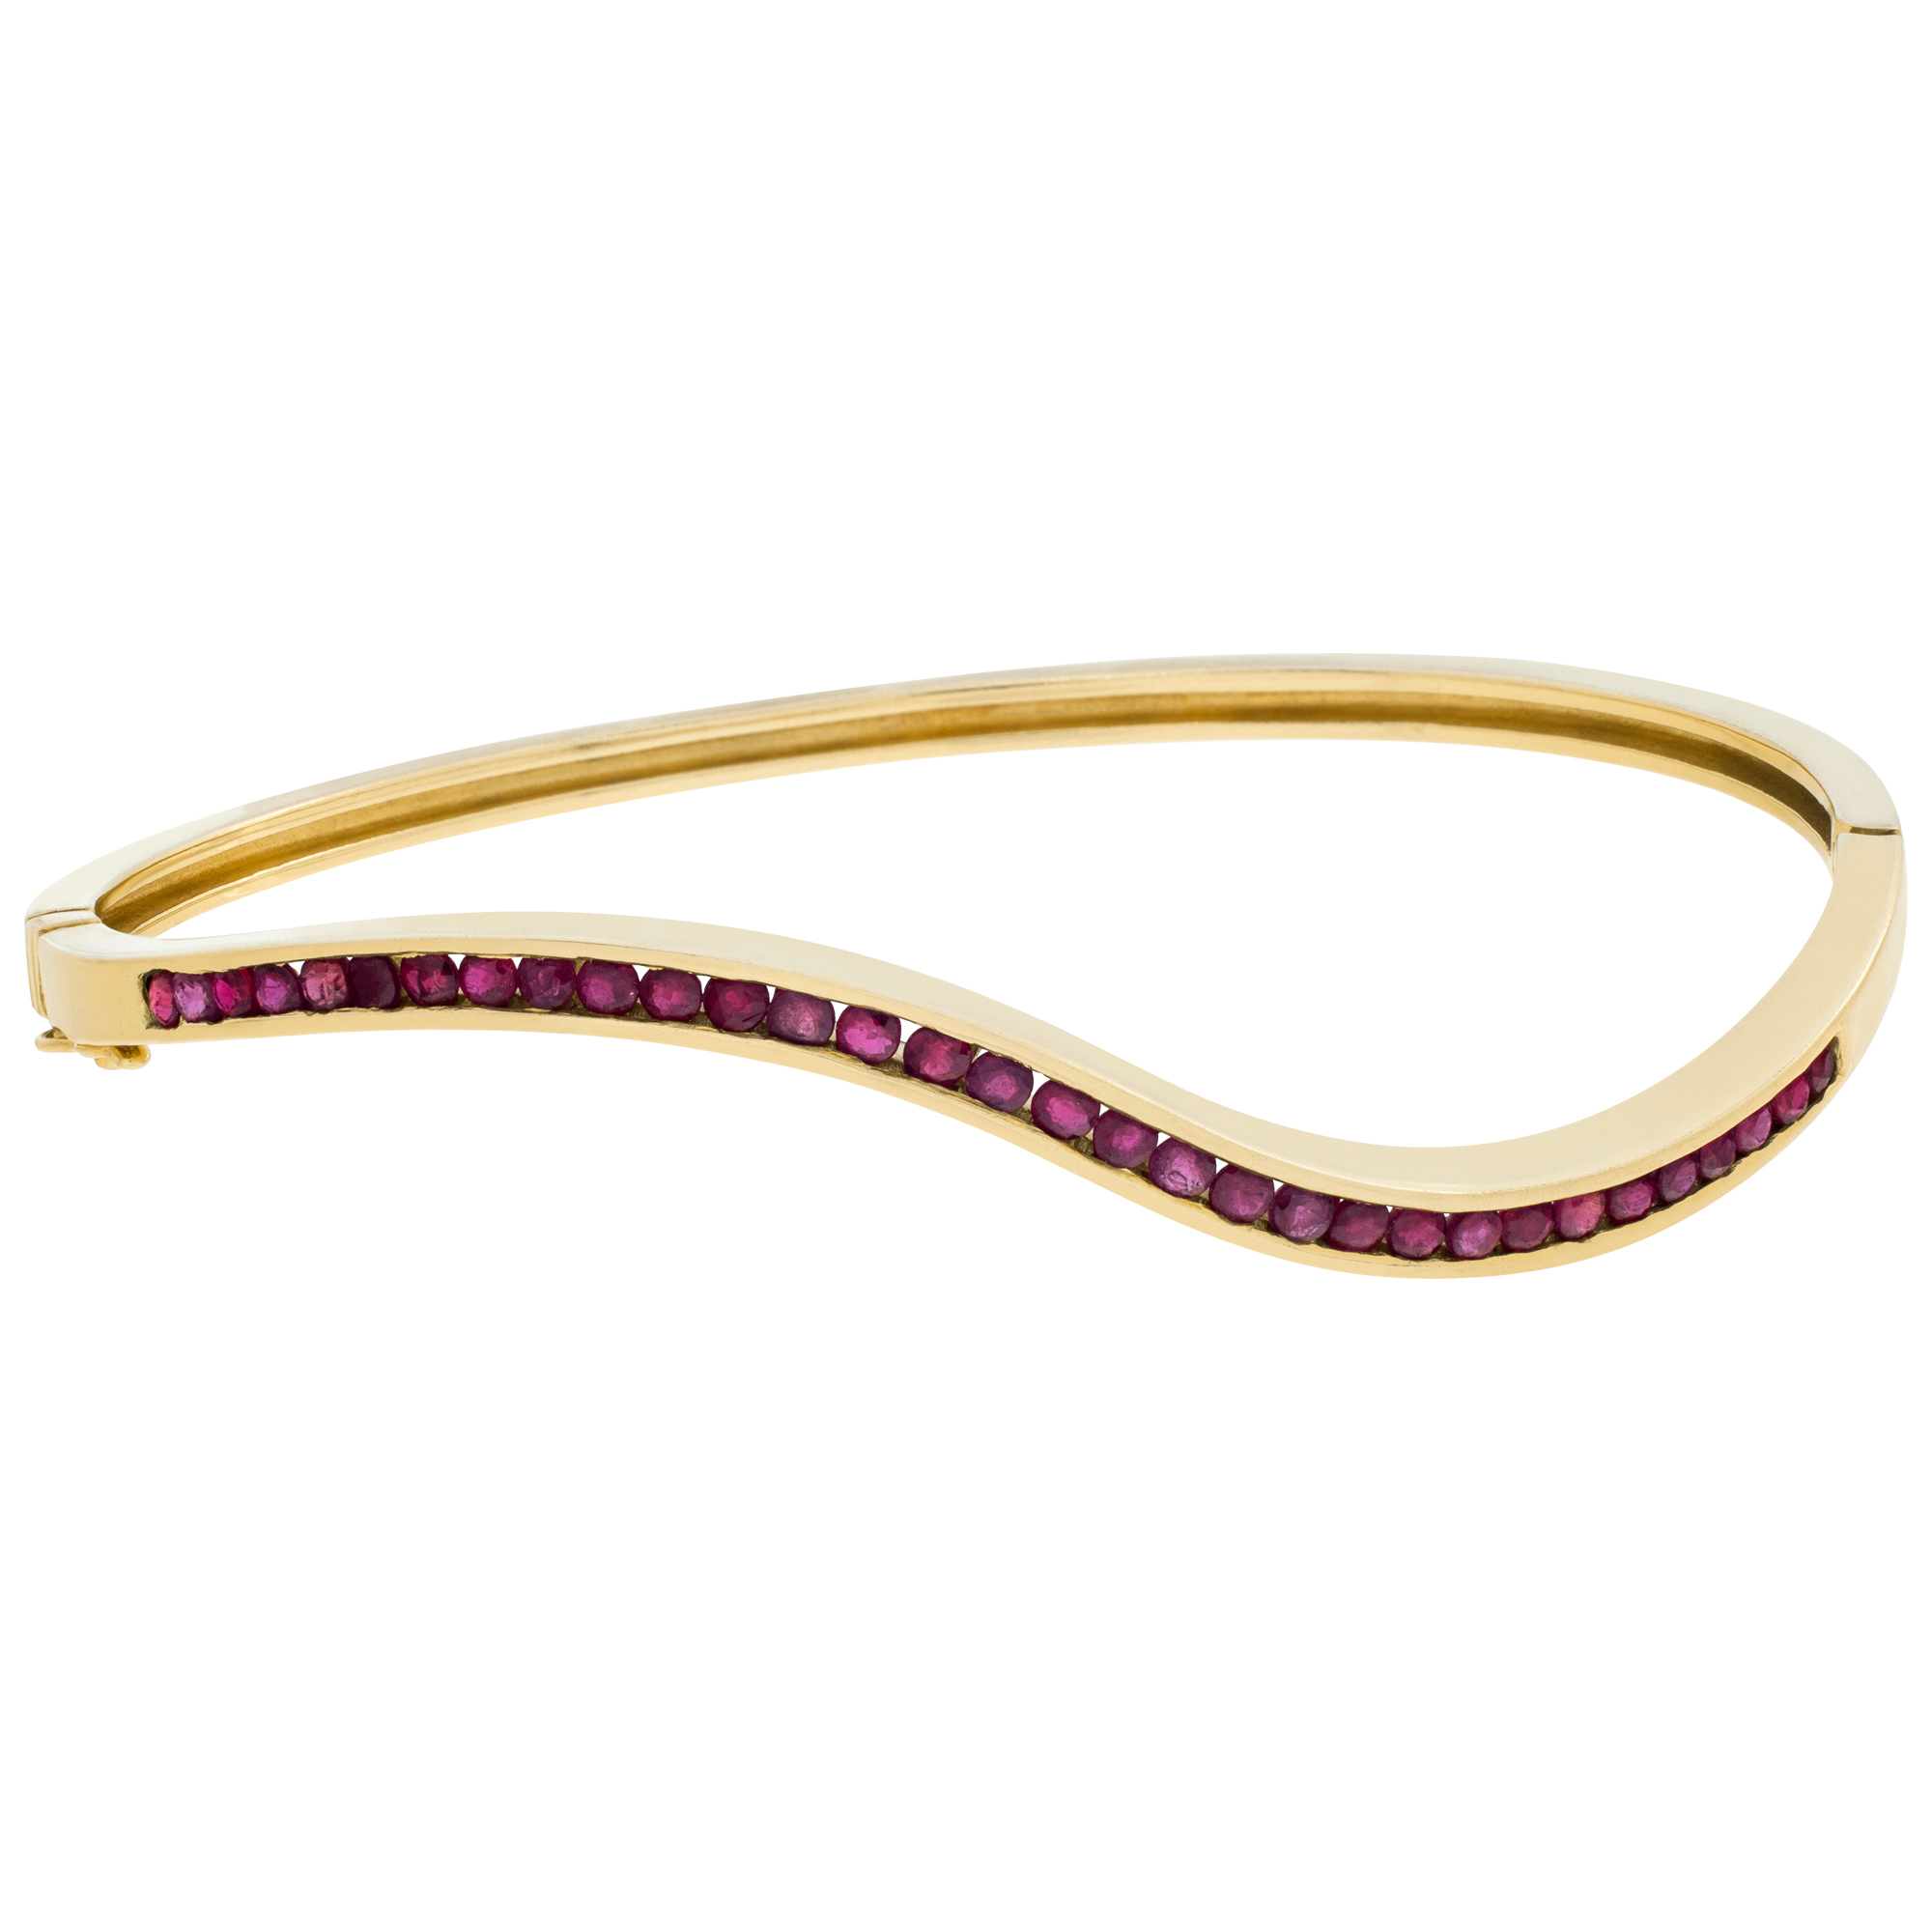 Waved 14k yellow gold bangle with over 1carat in red rubies